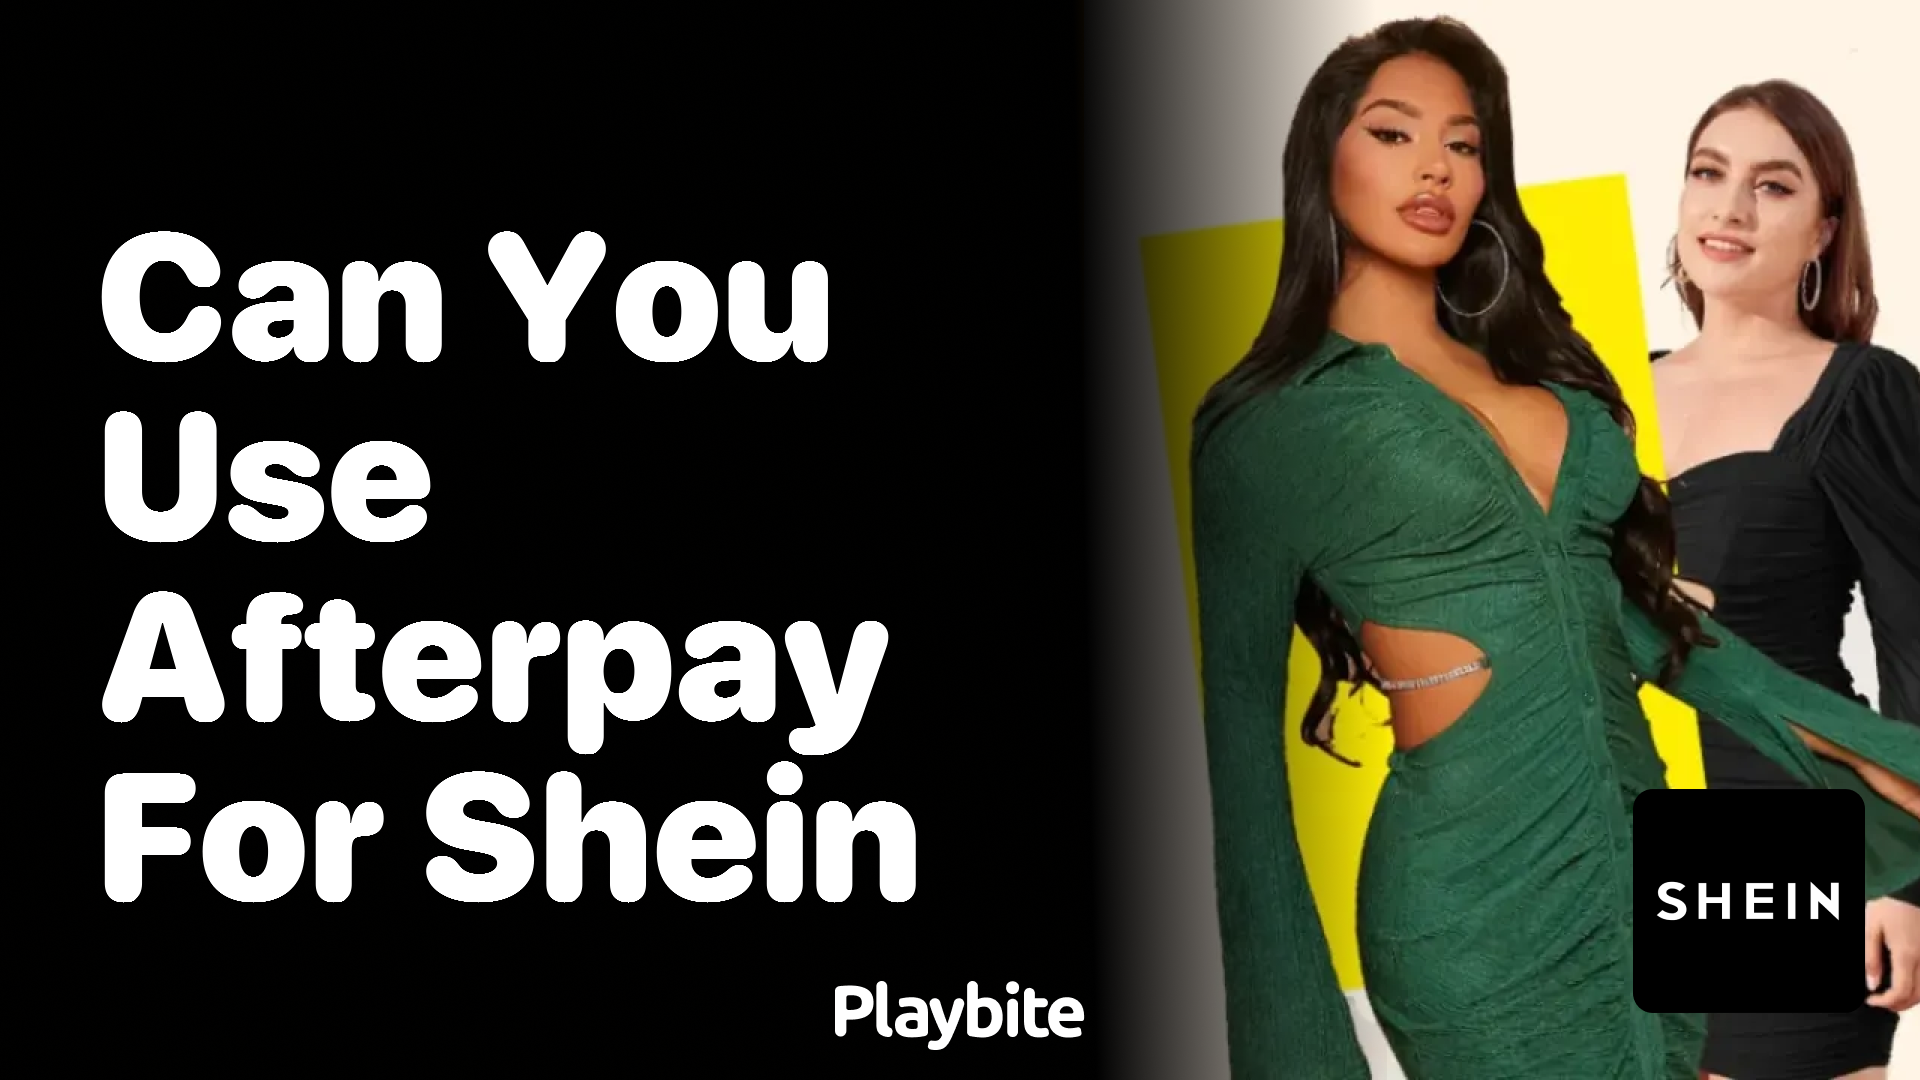 Can You Use Afterpay for SHEIN Purchases?